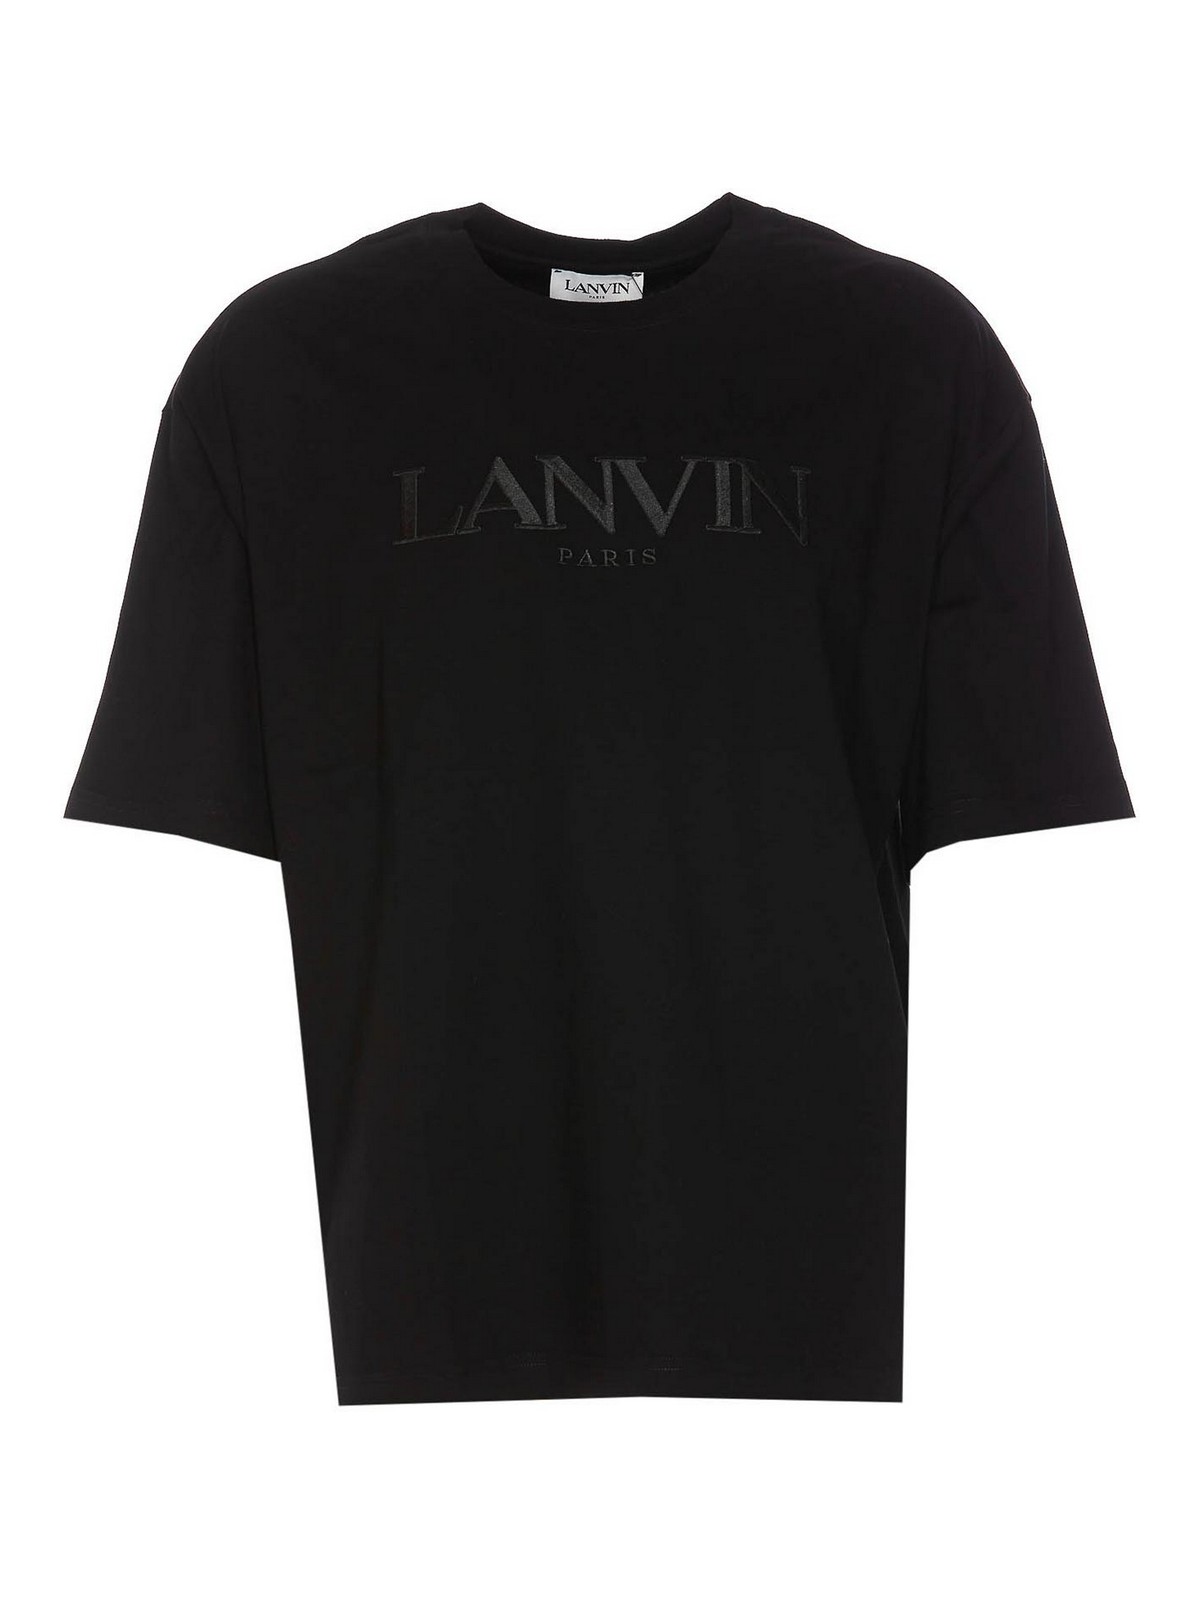 Lanvin Black T-shirt With Frontal Logo